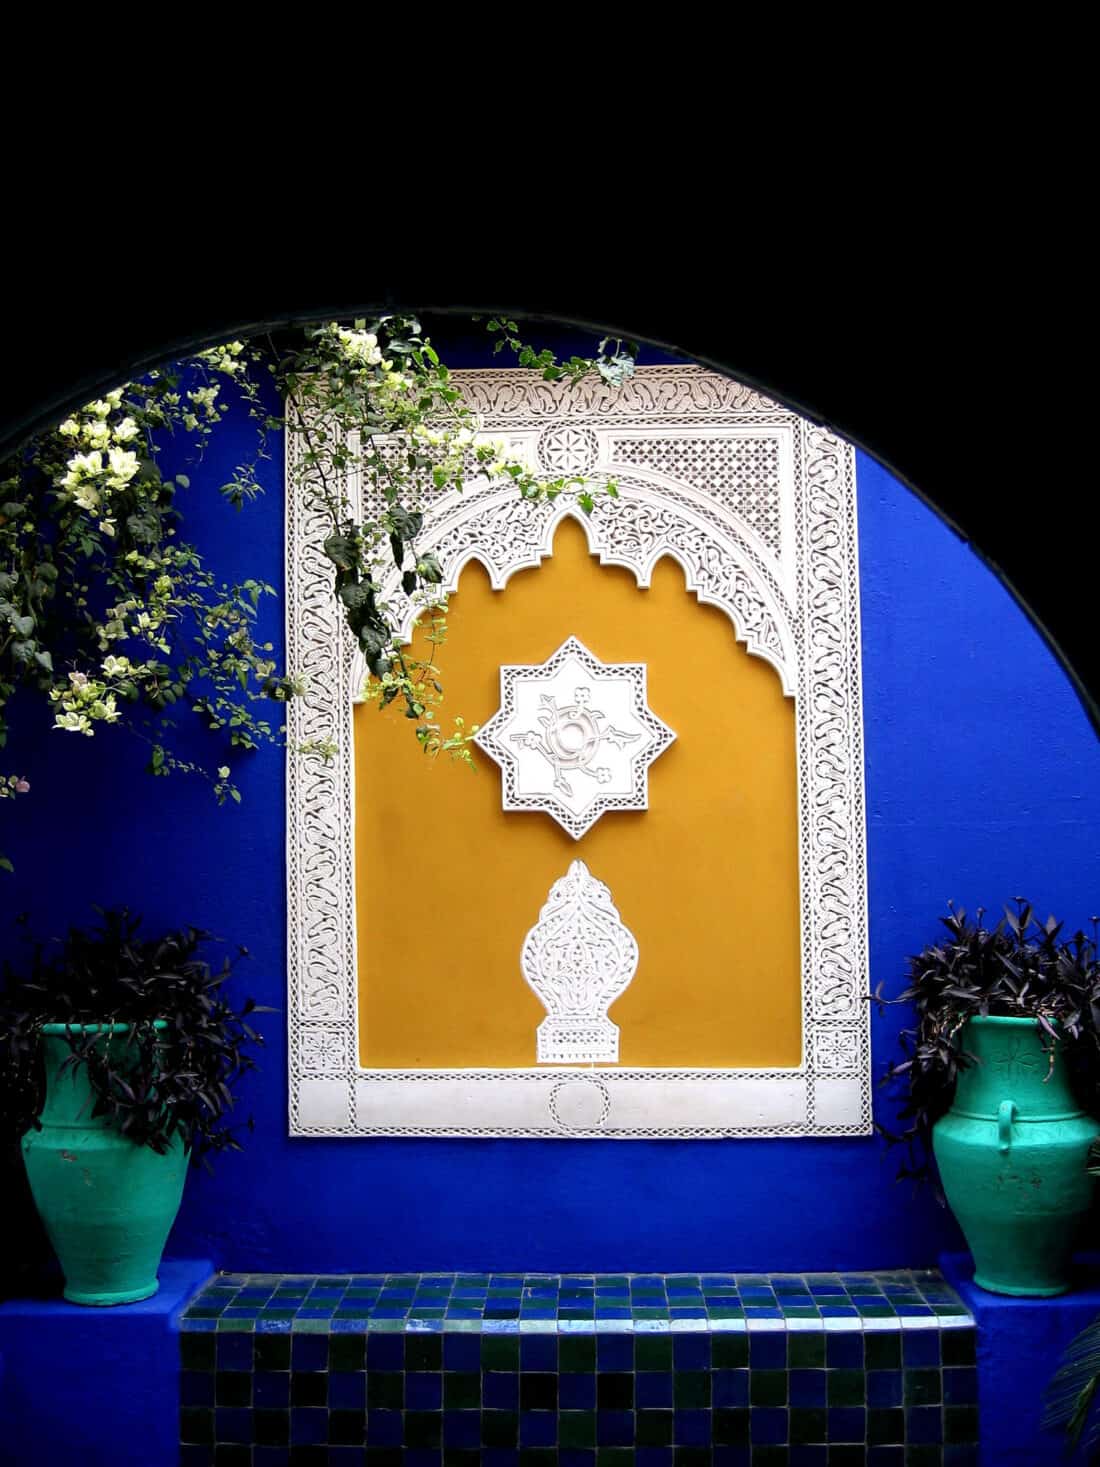 An ornate window with traditional Moroccan design, framed by vibrant blue walls of Majorelle Garden and flanked by potted plants.